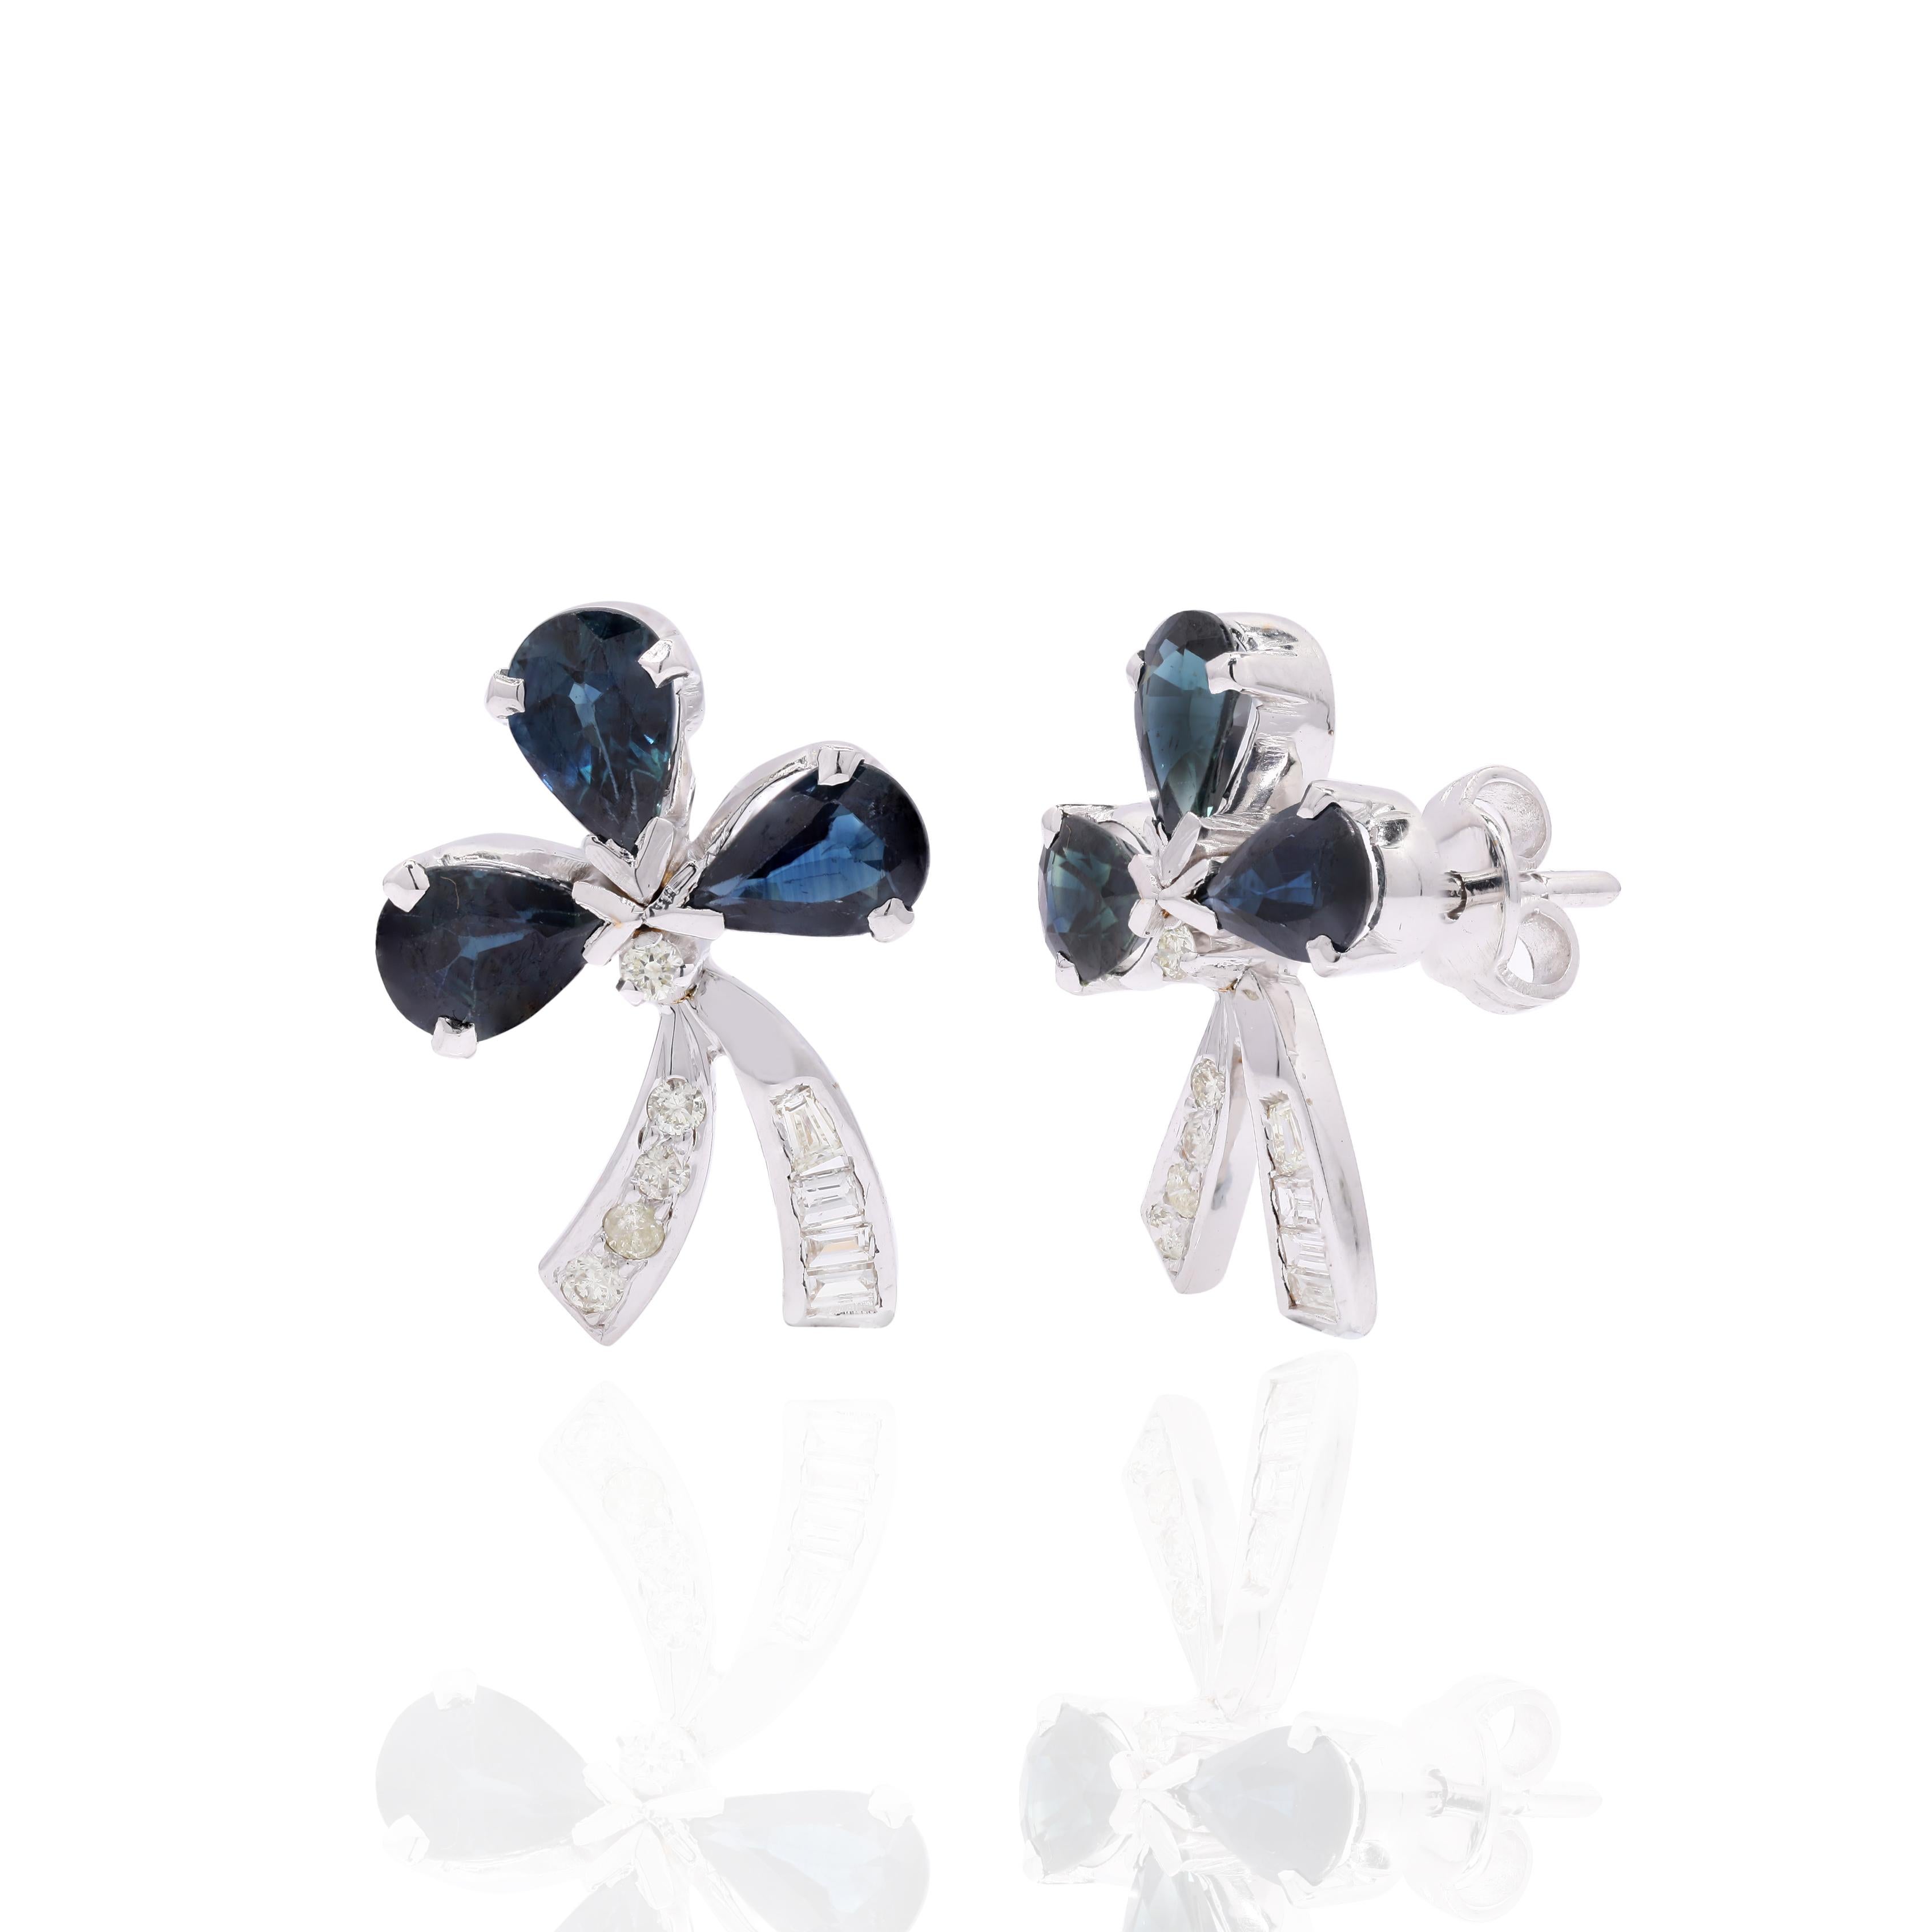 Studs create a subtle beauty while showcasing the colors of the natural precious gemstones and illuminating diamonds making a statement.
Pear cut blue sapphire studs with diamonds in 14K gold. Embrace your look with these stunning pair of earrings